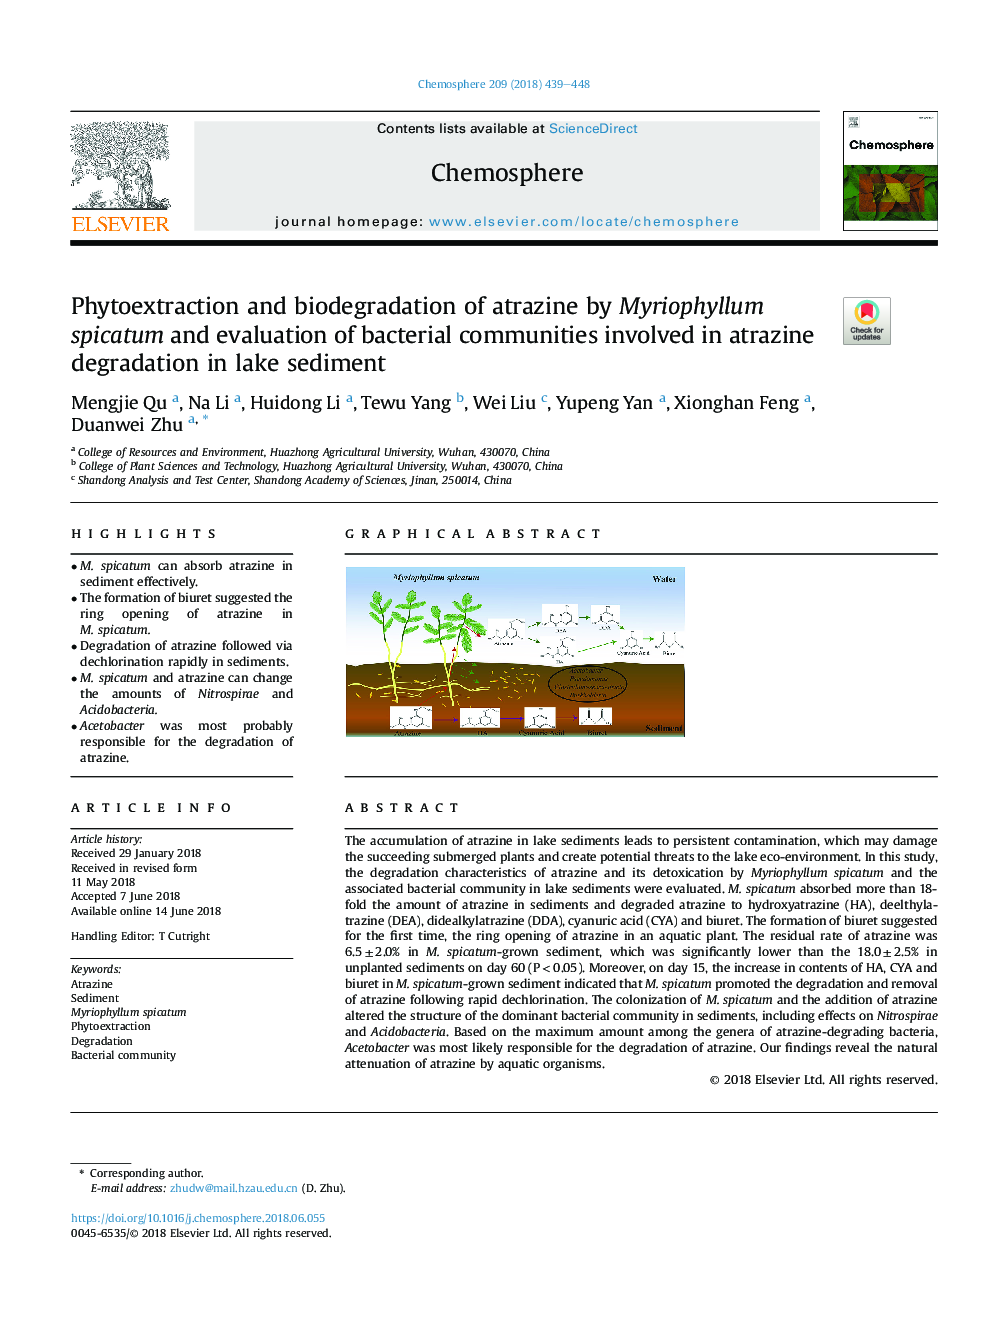 Phytoextraction and biodegradation of atrazine by Myriophyllum spicatum and evaluation of bacterial communities involved in atrazine degradation in lake sediment